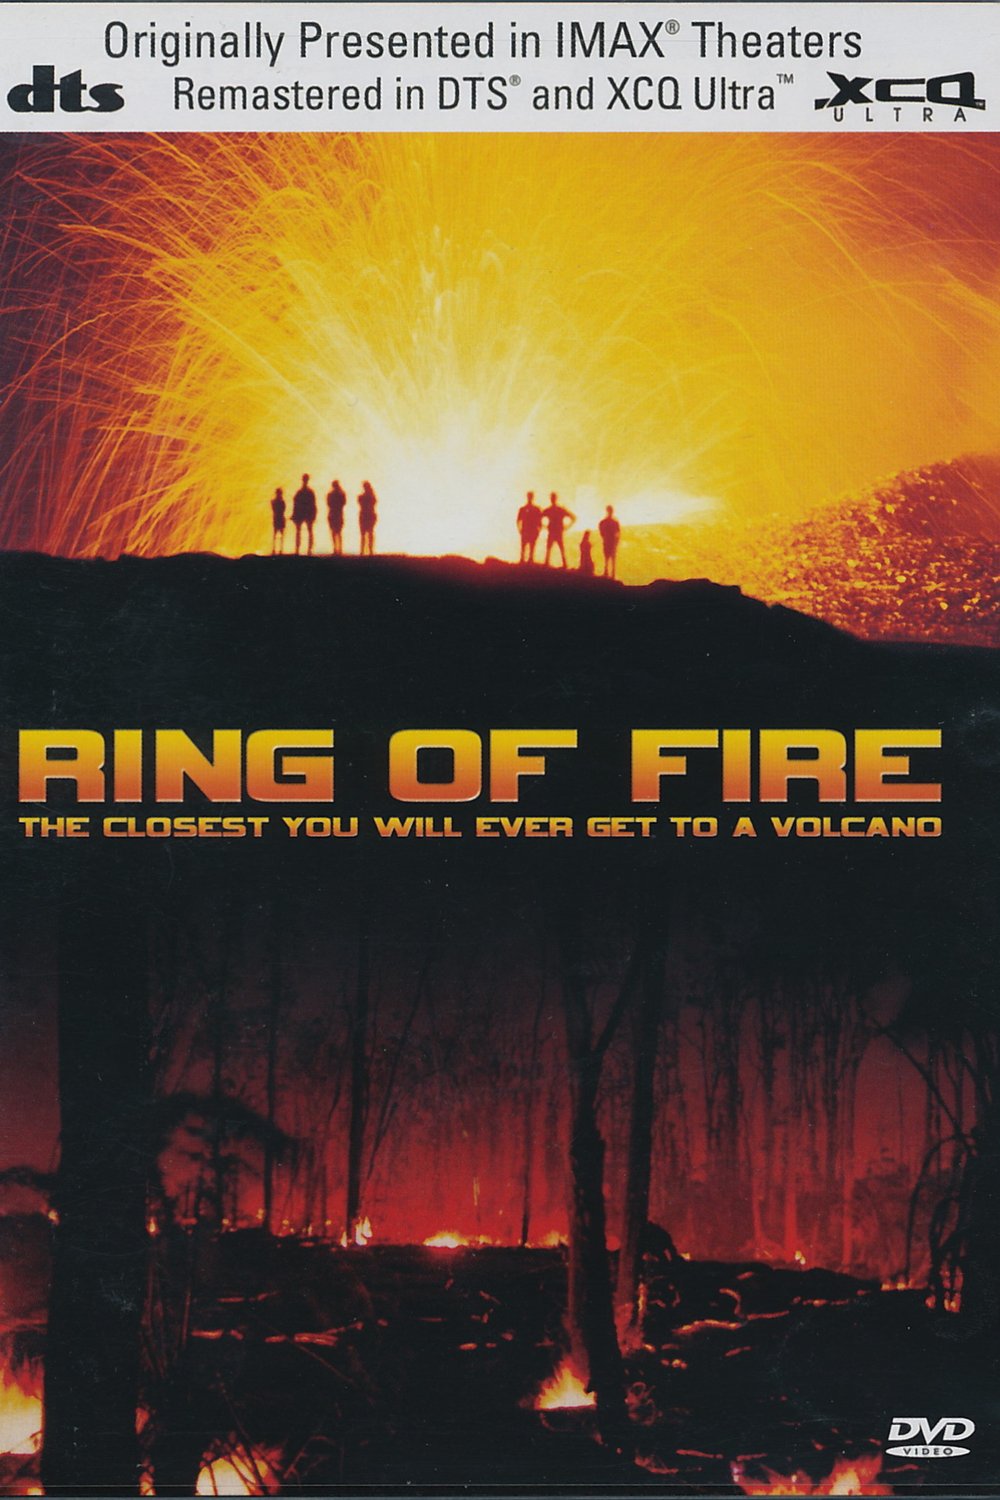 Poster of the movie Ring of Fire